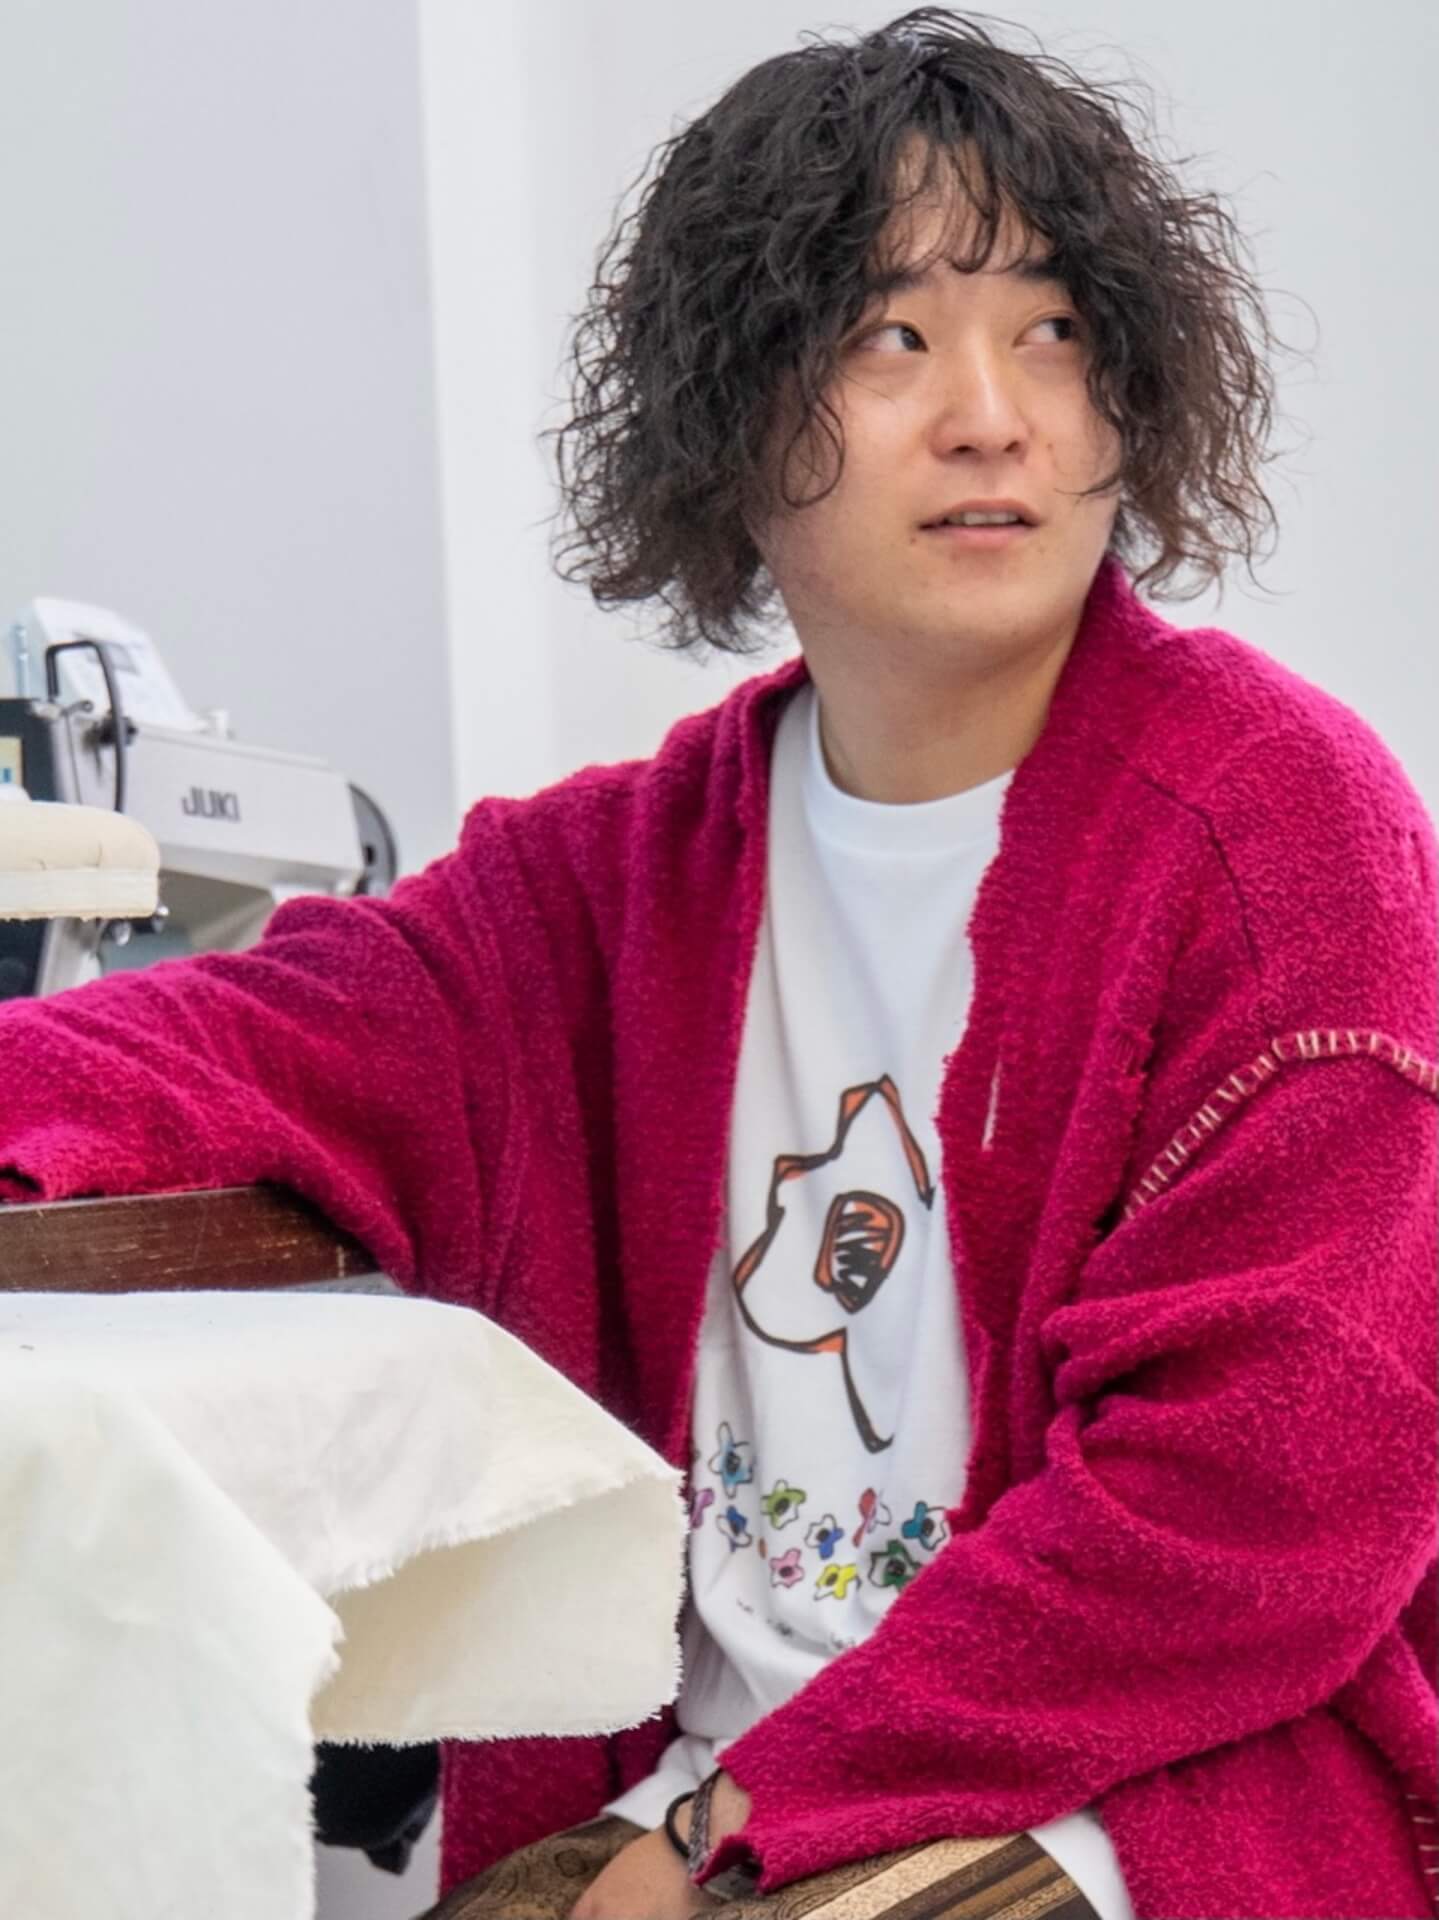 Tシャツを通した表現「BE AT TEE COLLECTION」がスタート！xiangyu、上出遼平らによるTシャツが受注販売 fashion211015-be-at-tee-collection-08